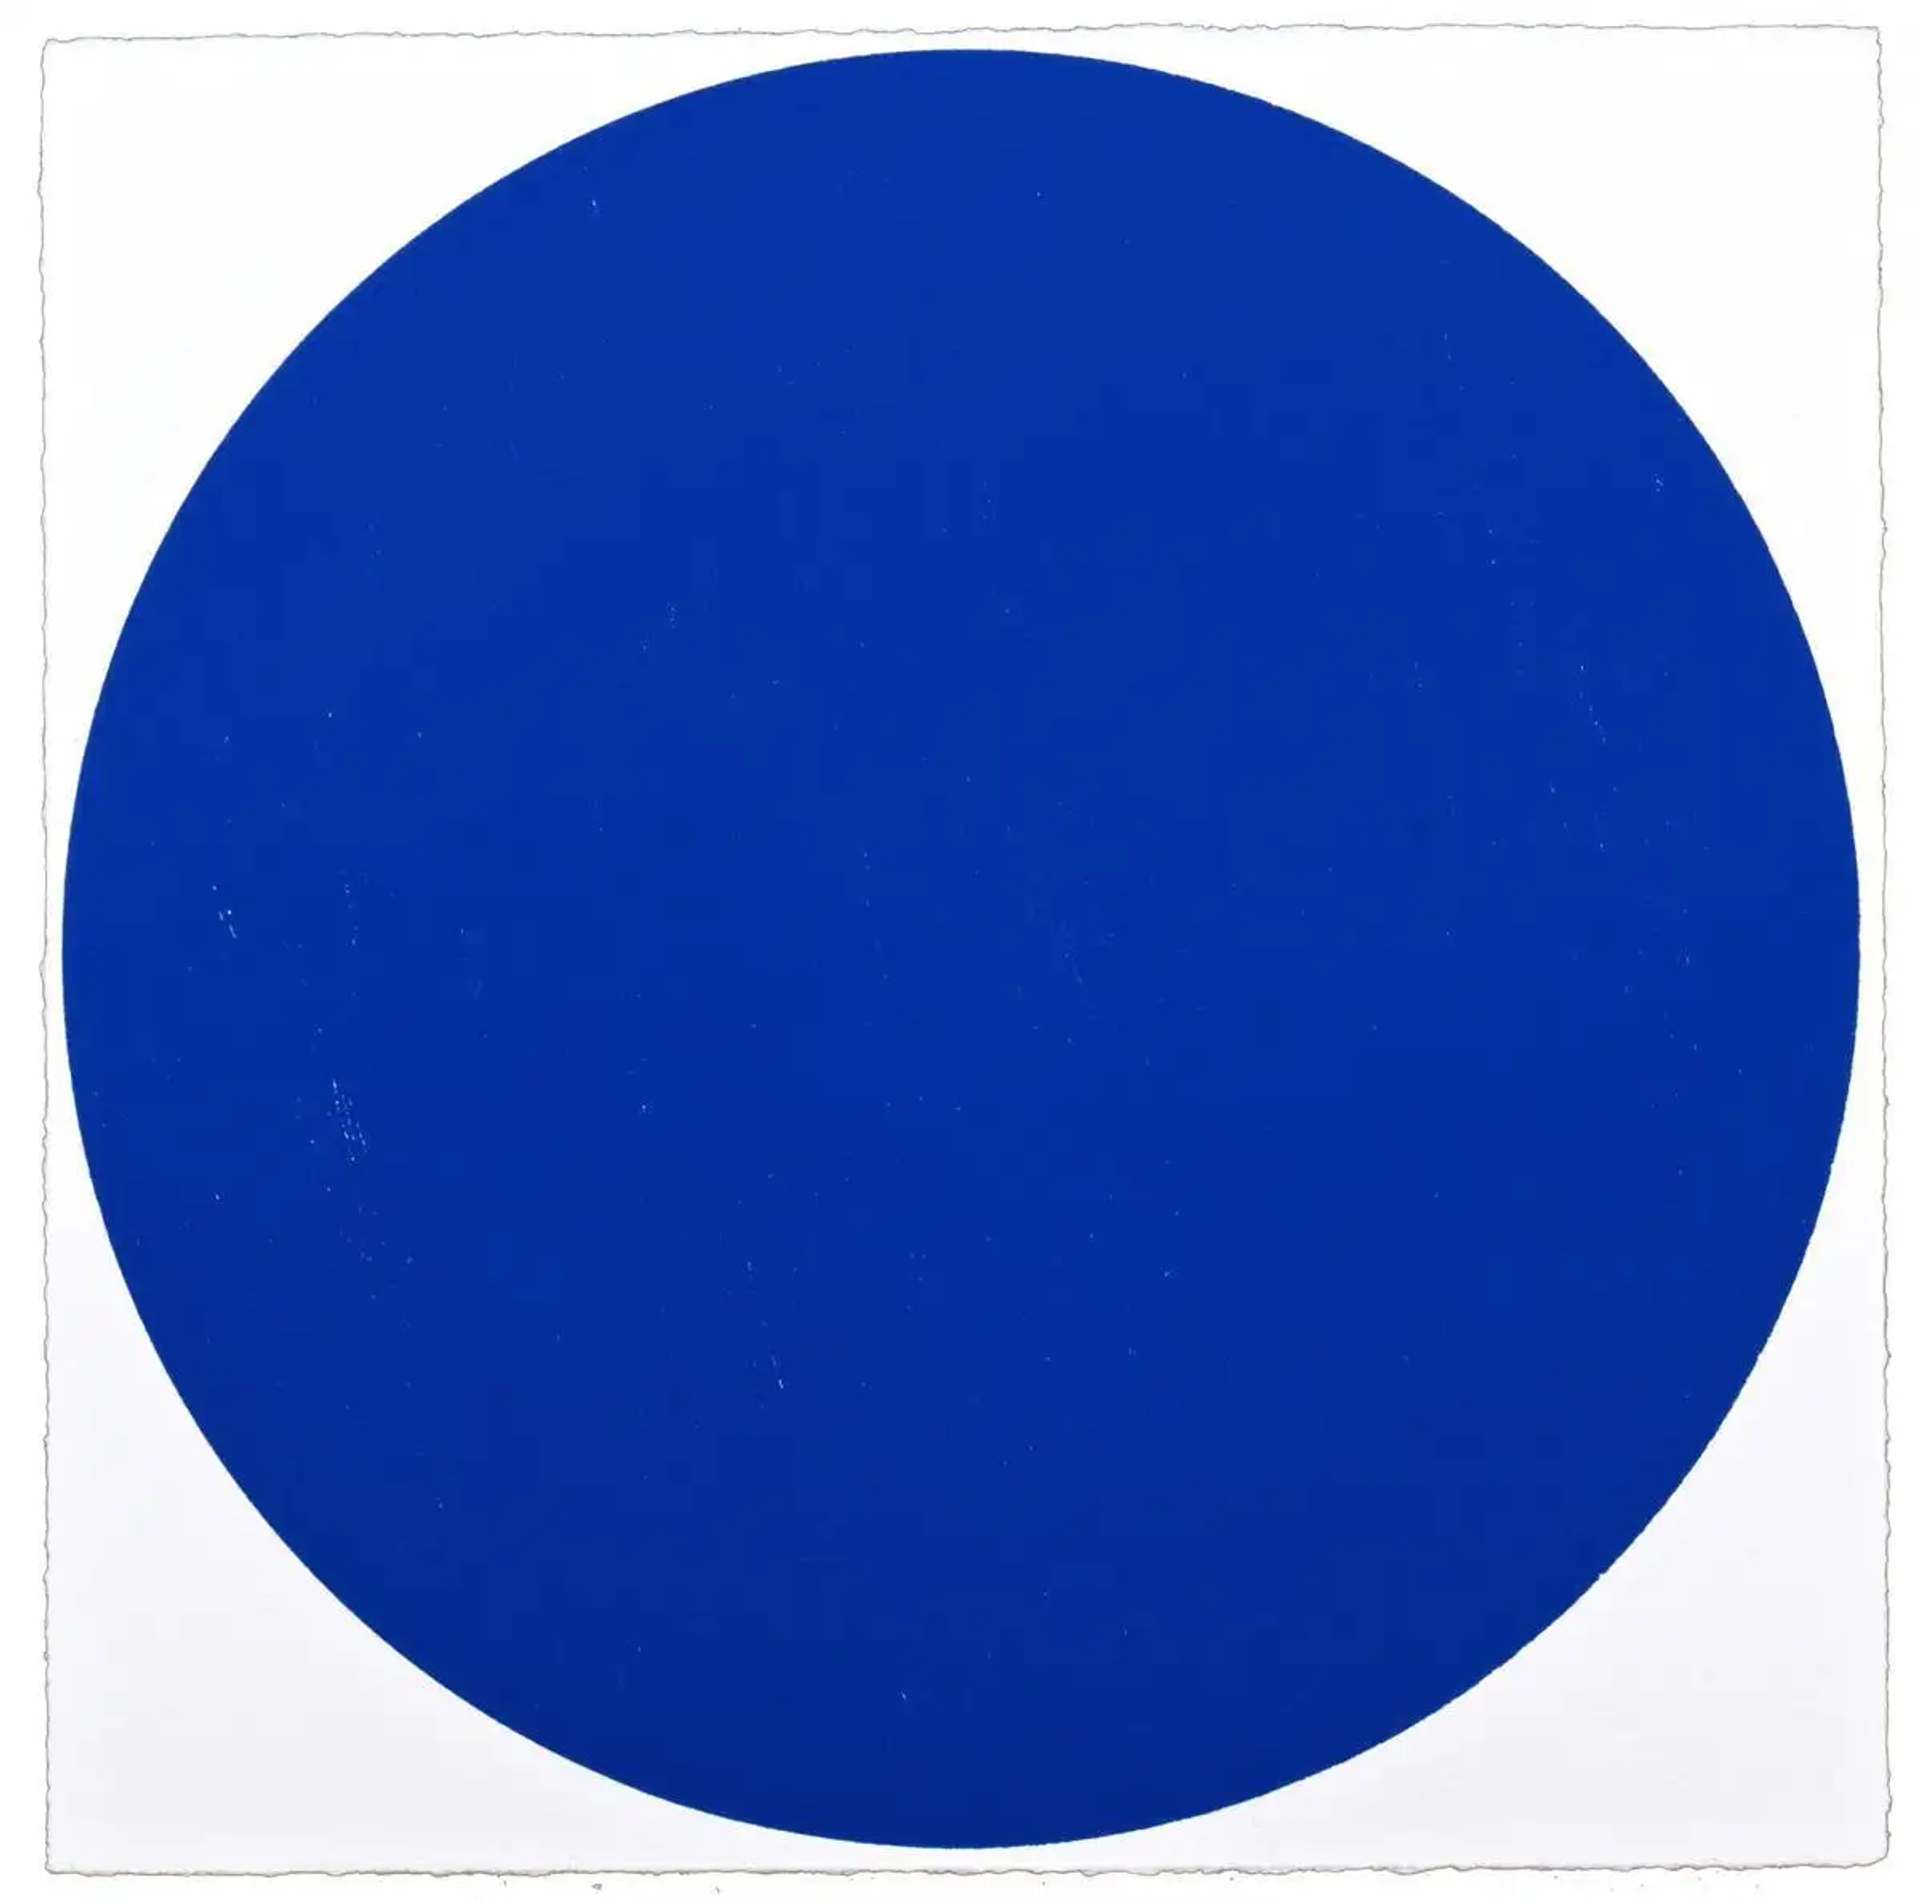 The print shows a perfect circle in blue, positioned in the centre of the square composition, set against a plain white backdrop.